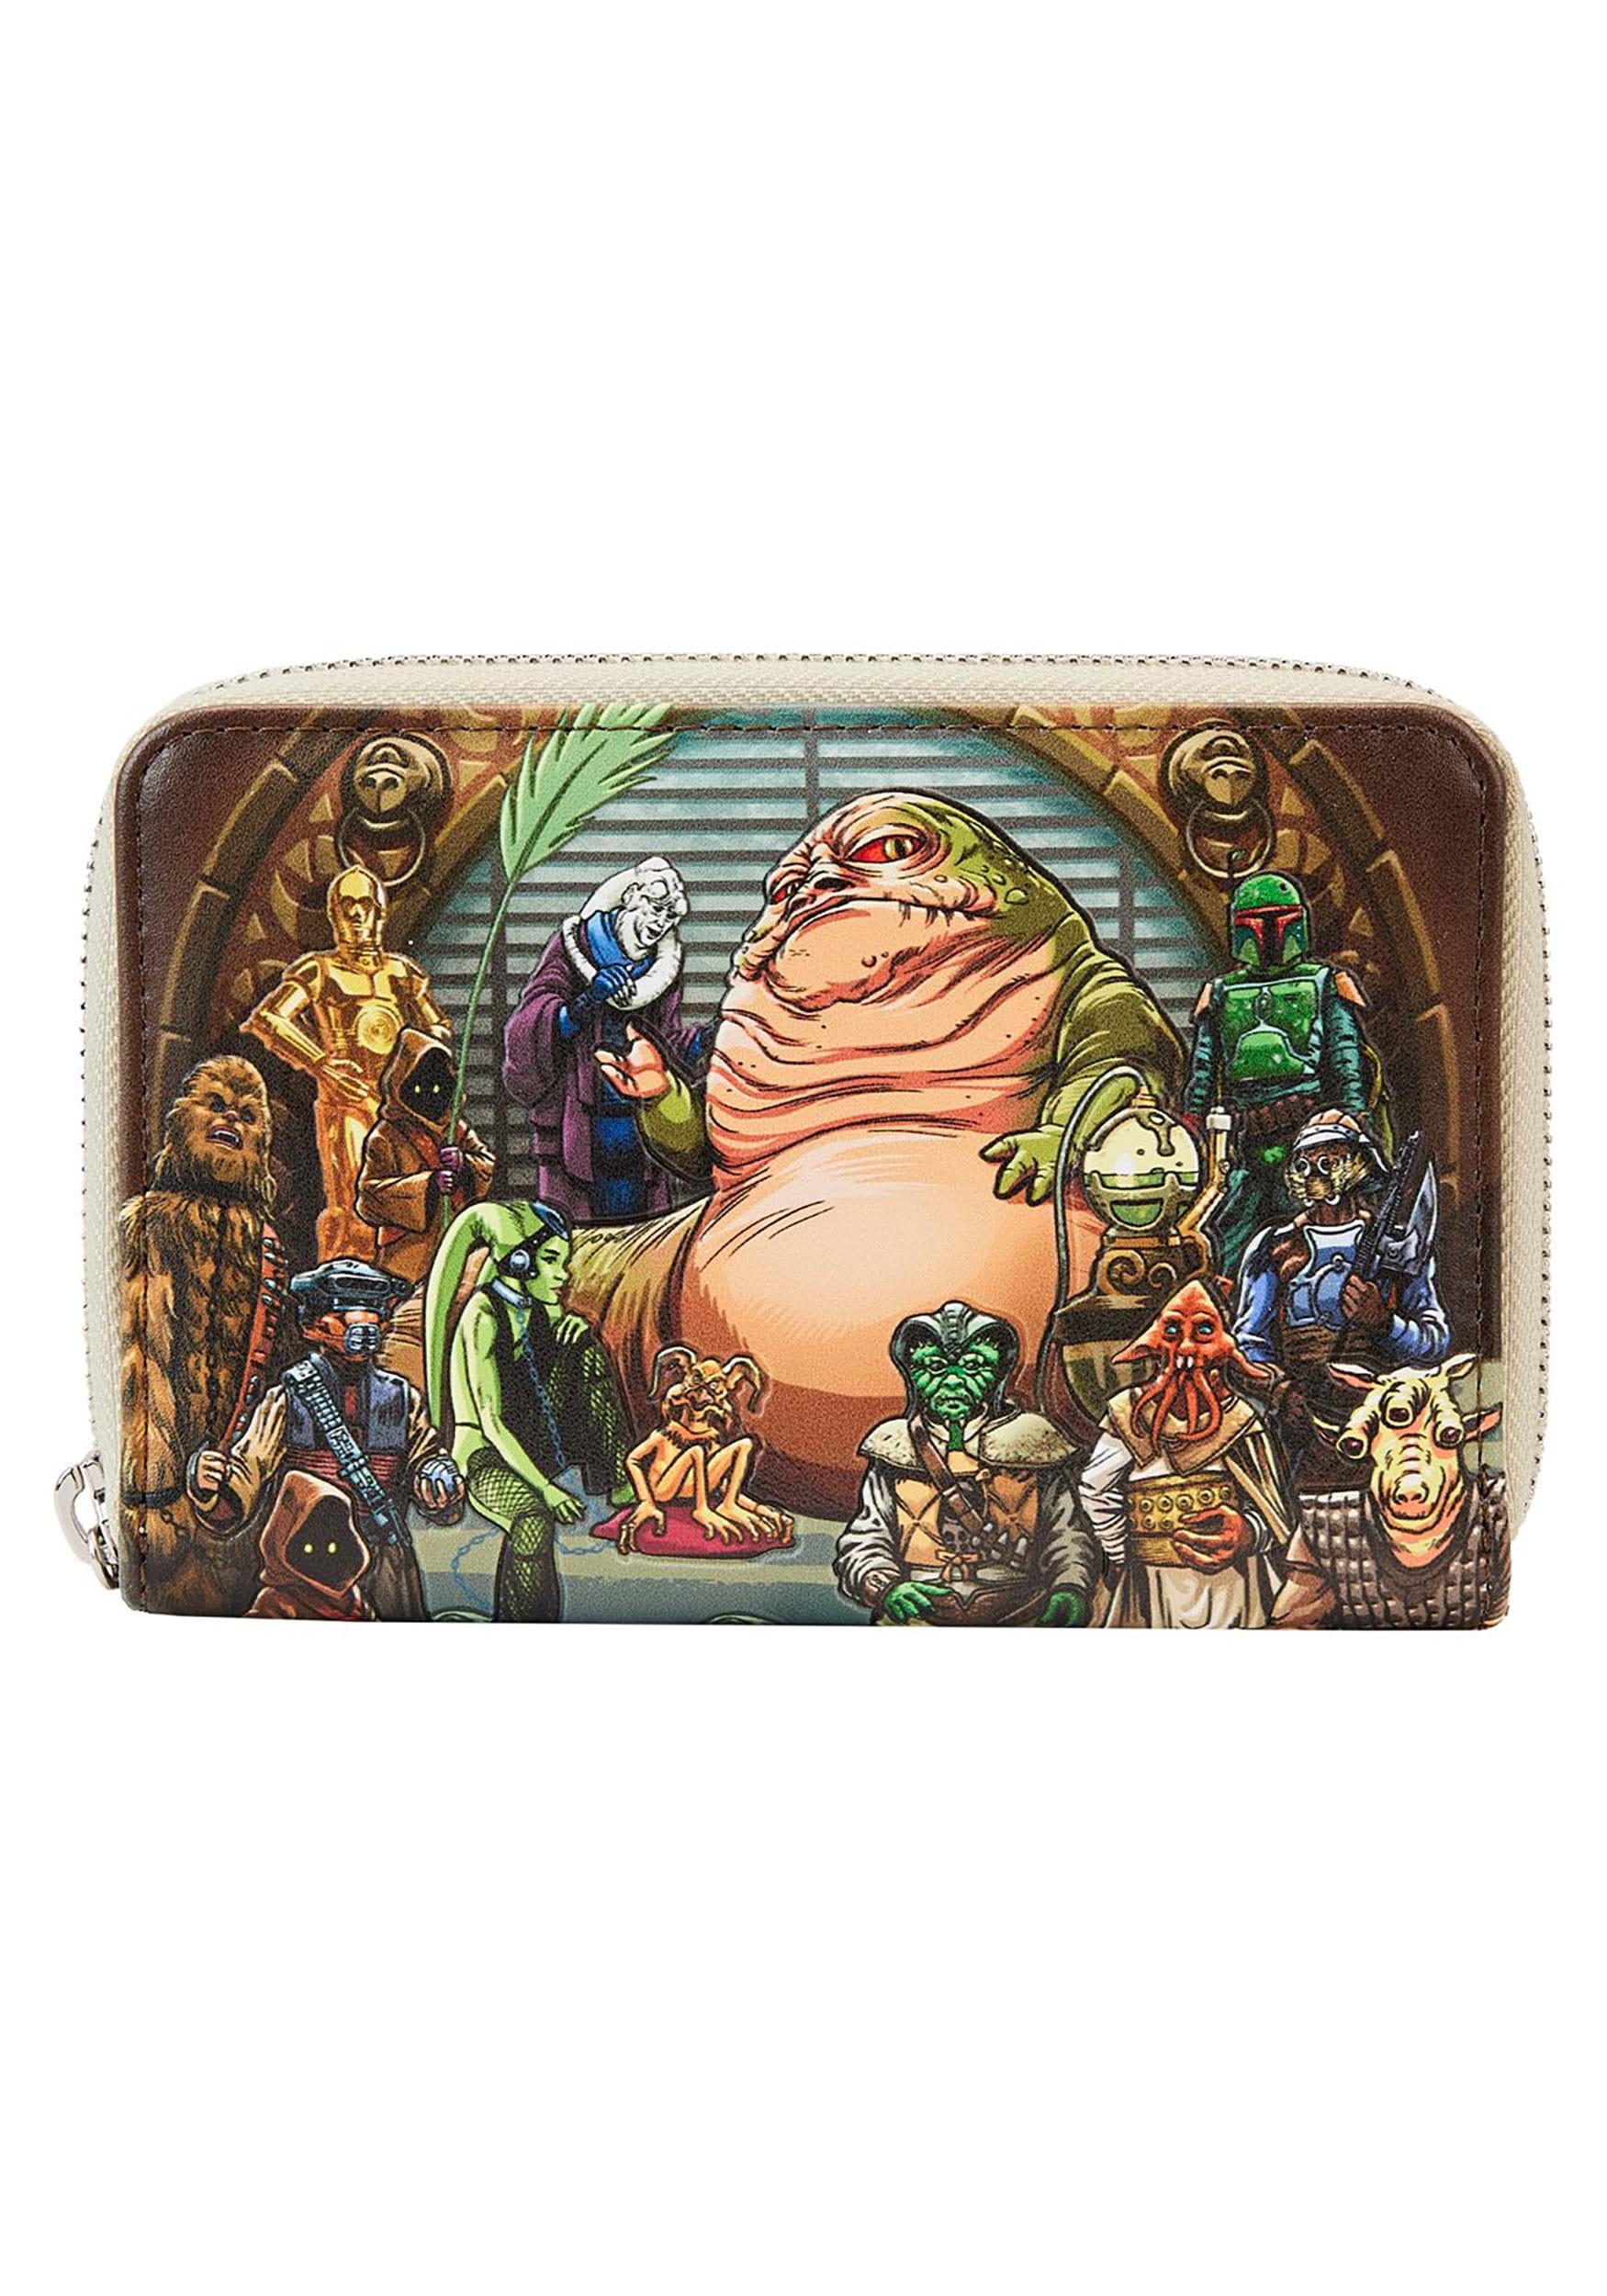 Star Wars Return of the Jedi 40th Anniversary Jabbas Palace Scene Loungefly Wallet